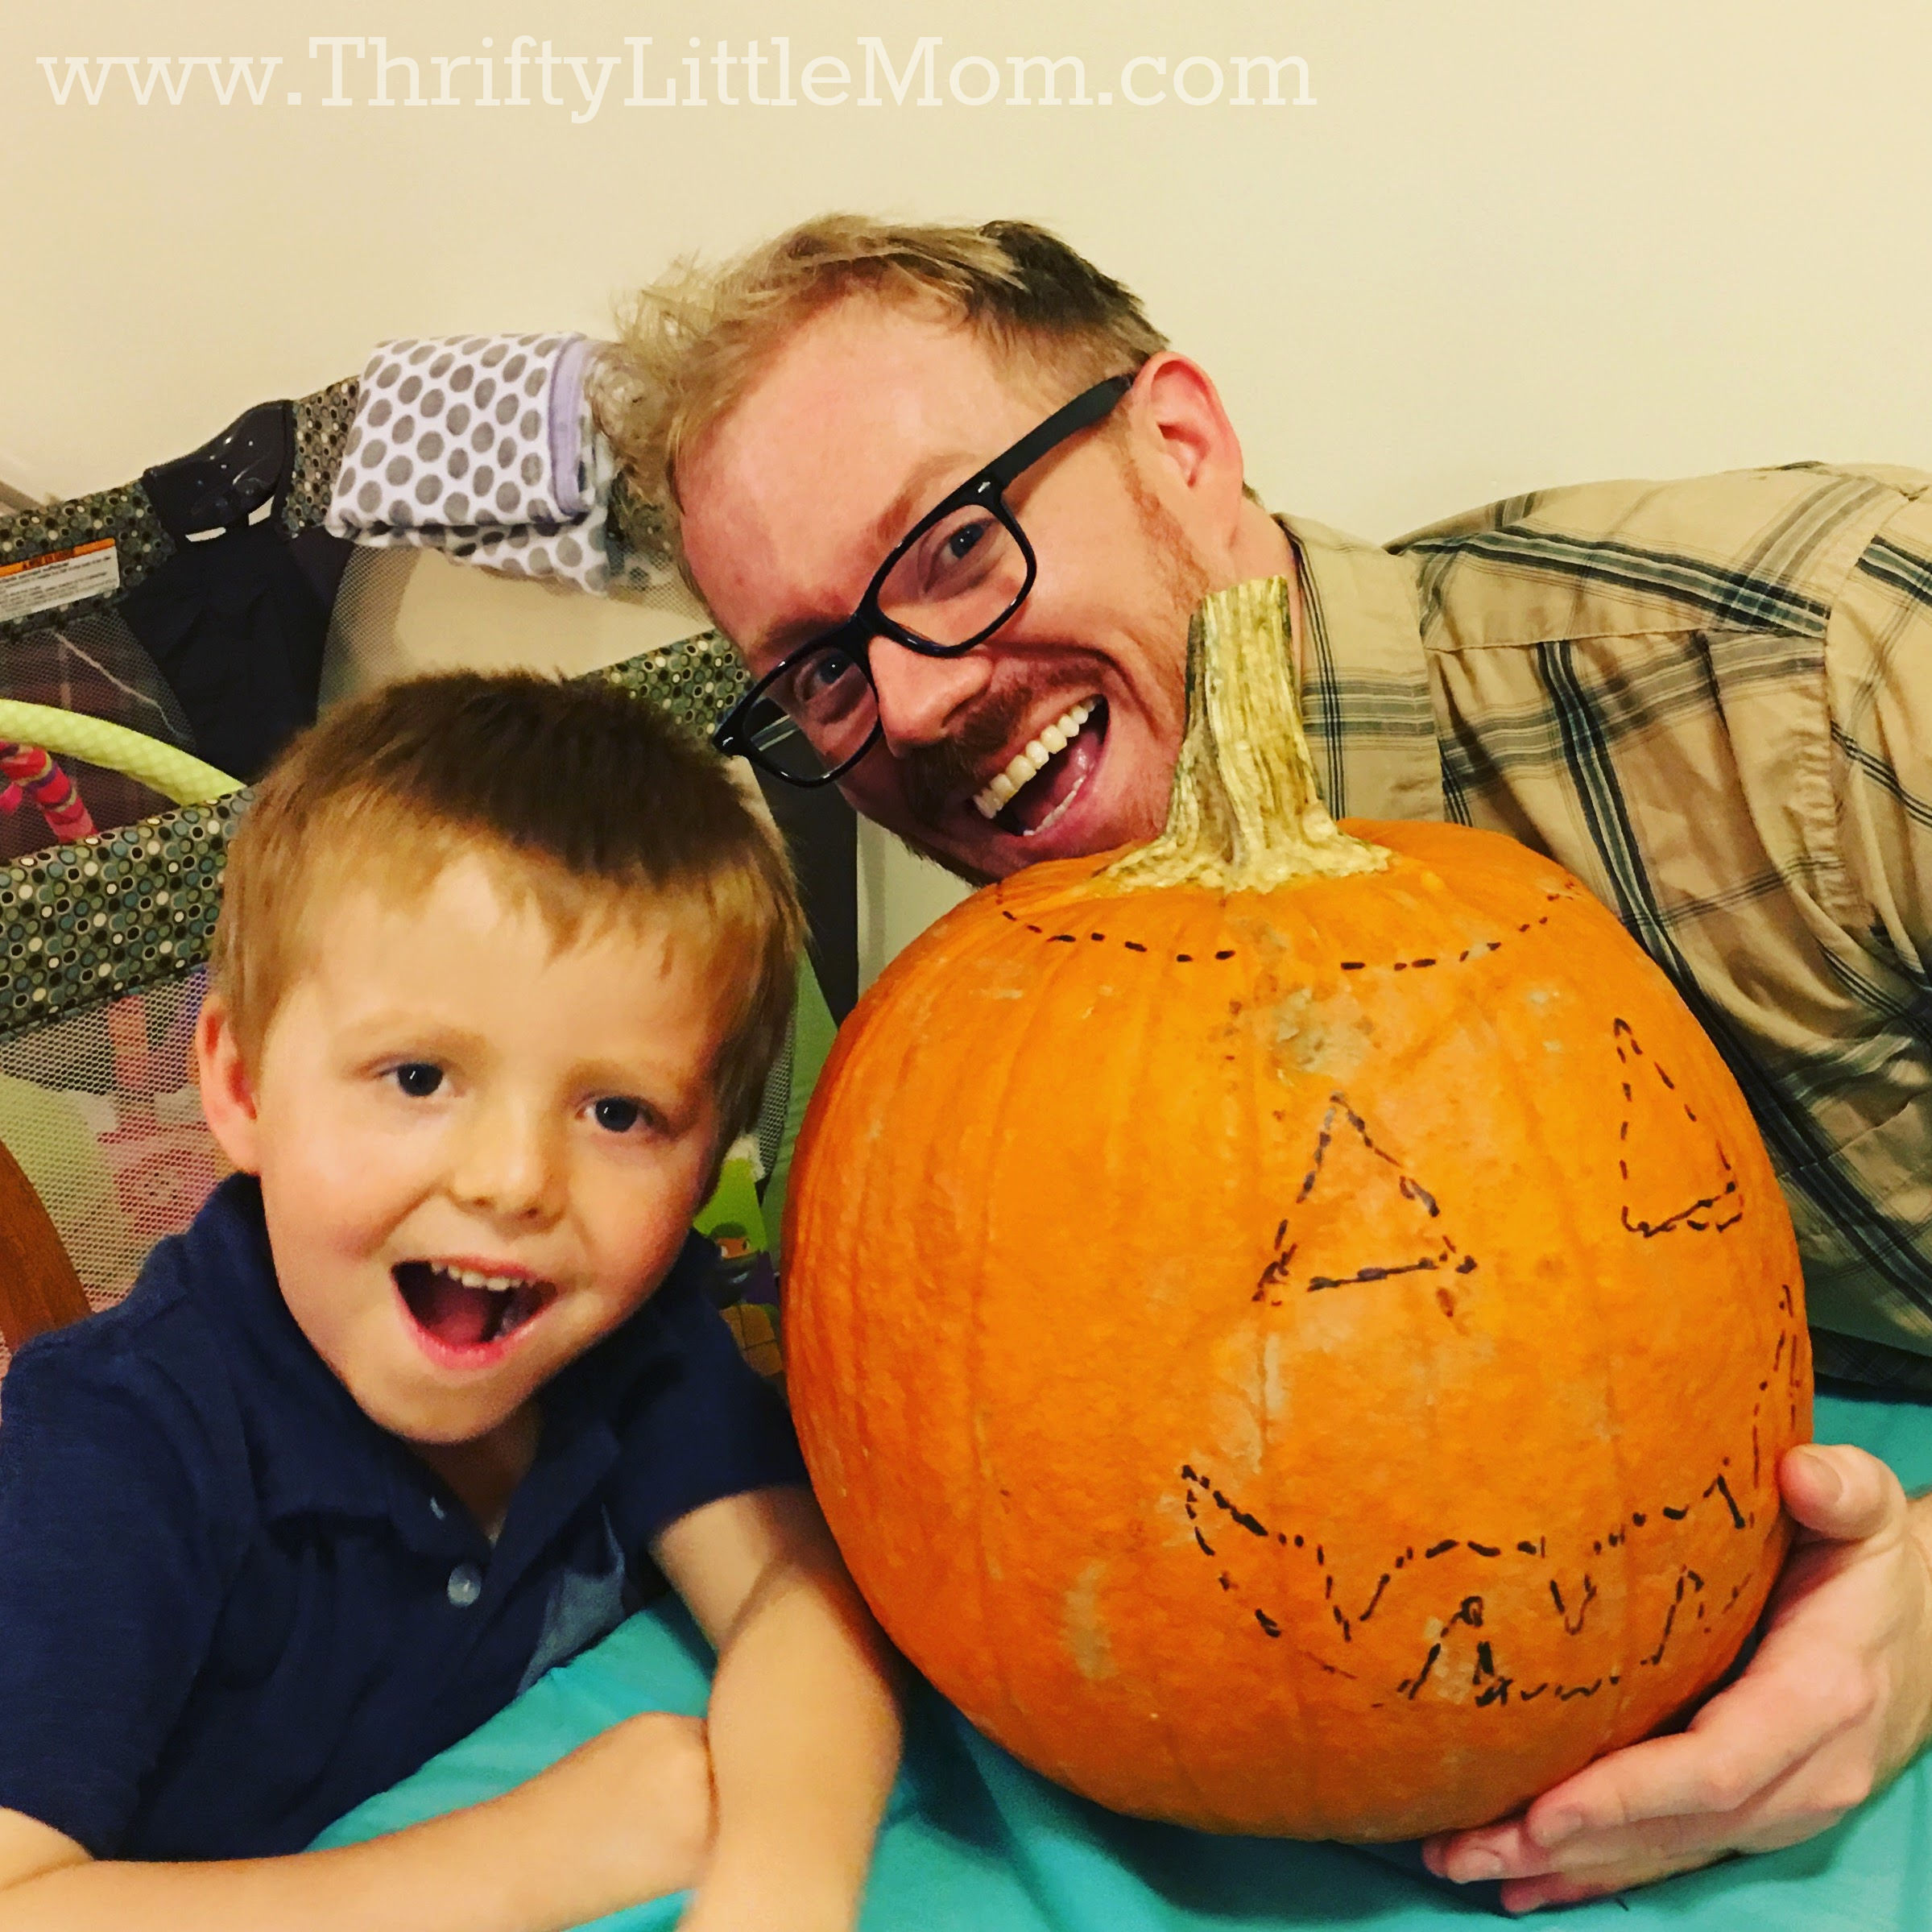 Pumpkin Fun 101:From Carving to Seed Roasting